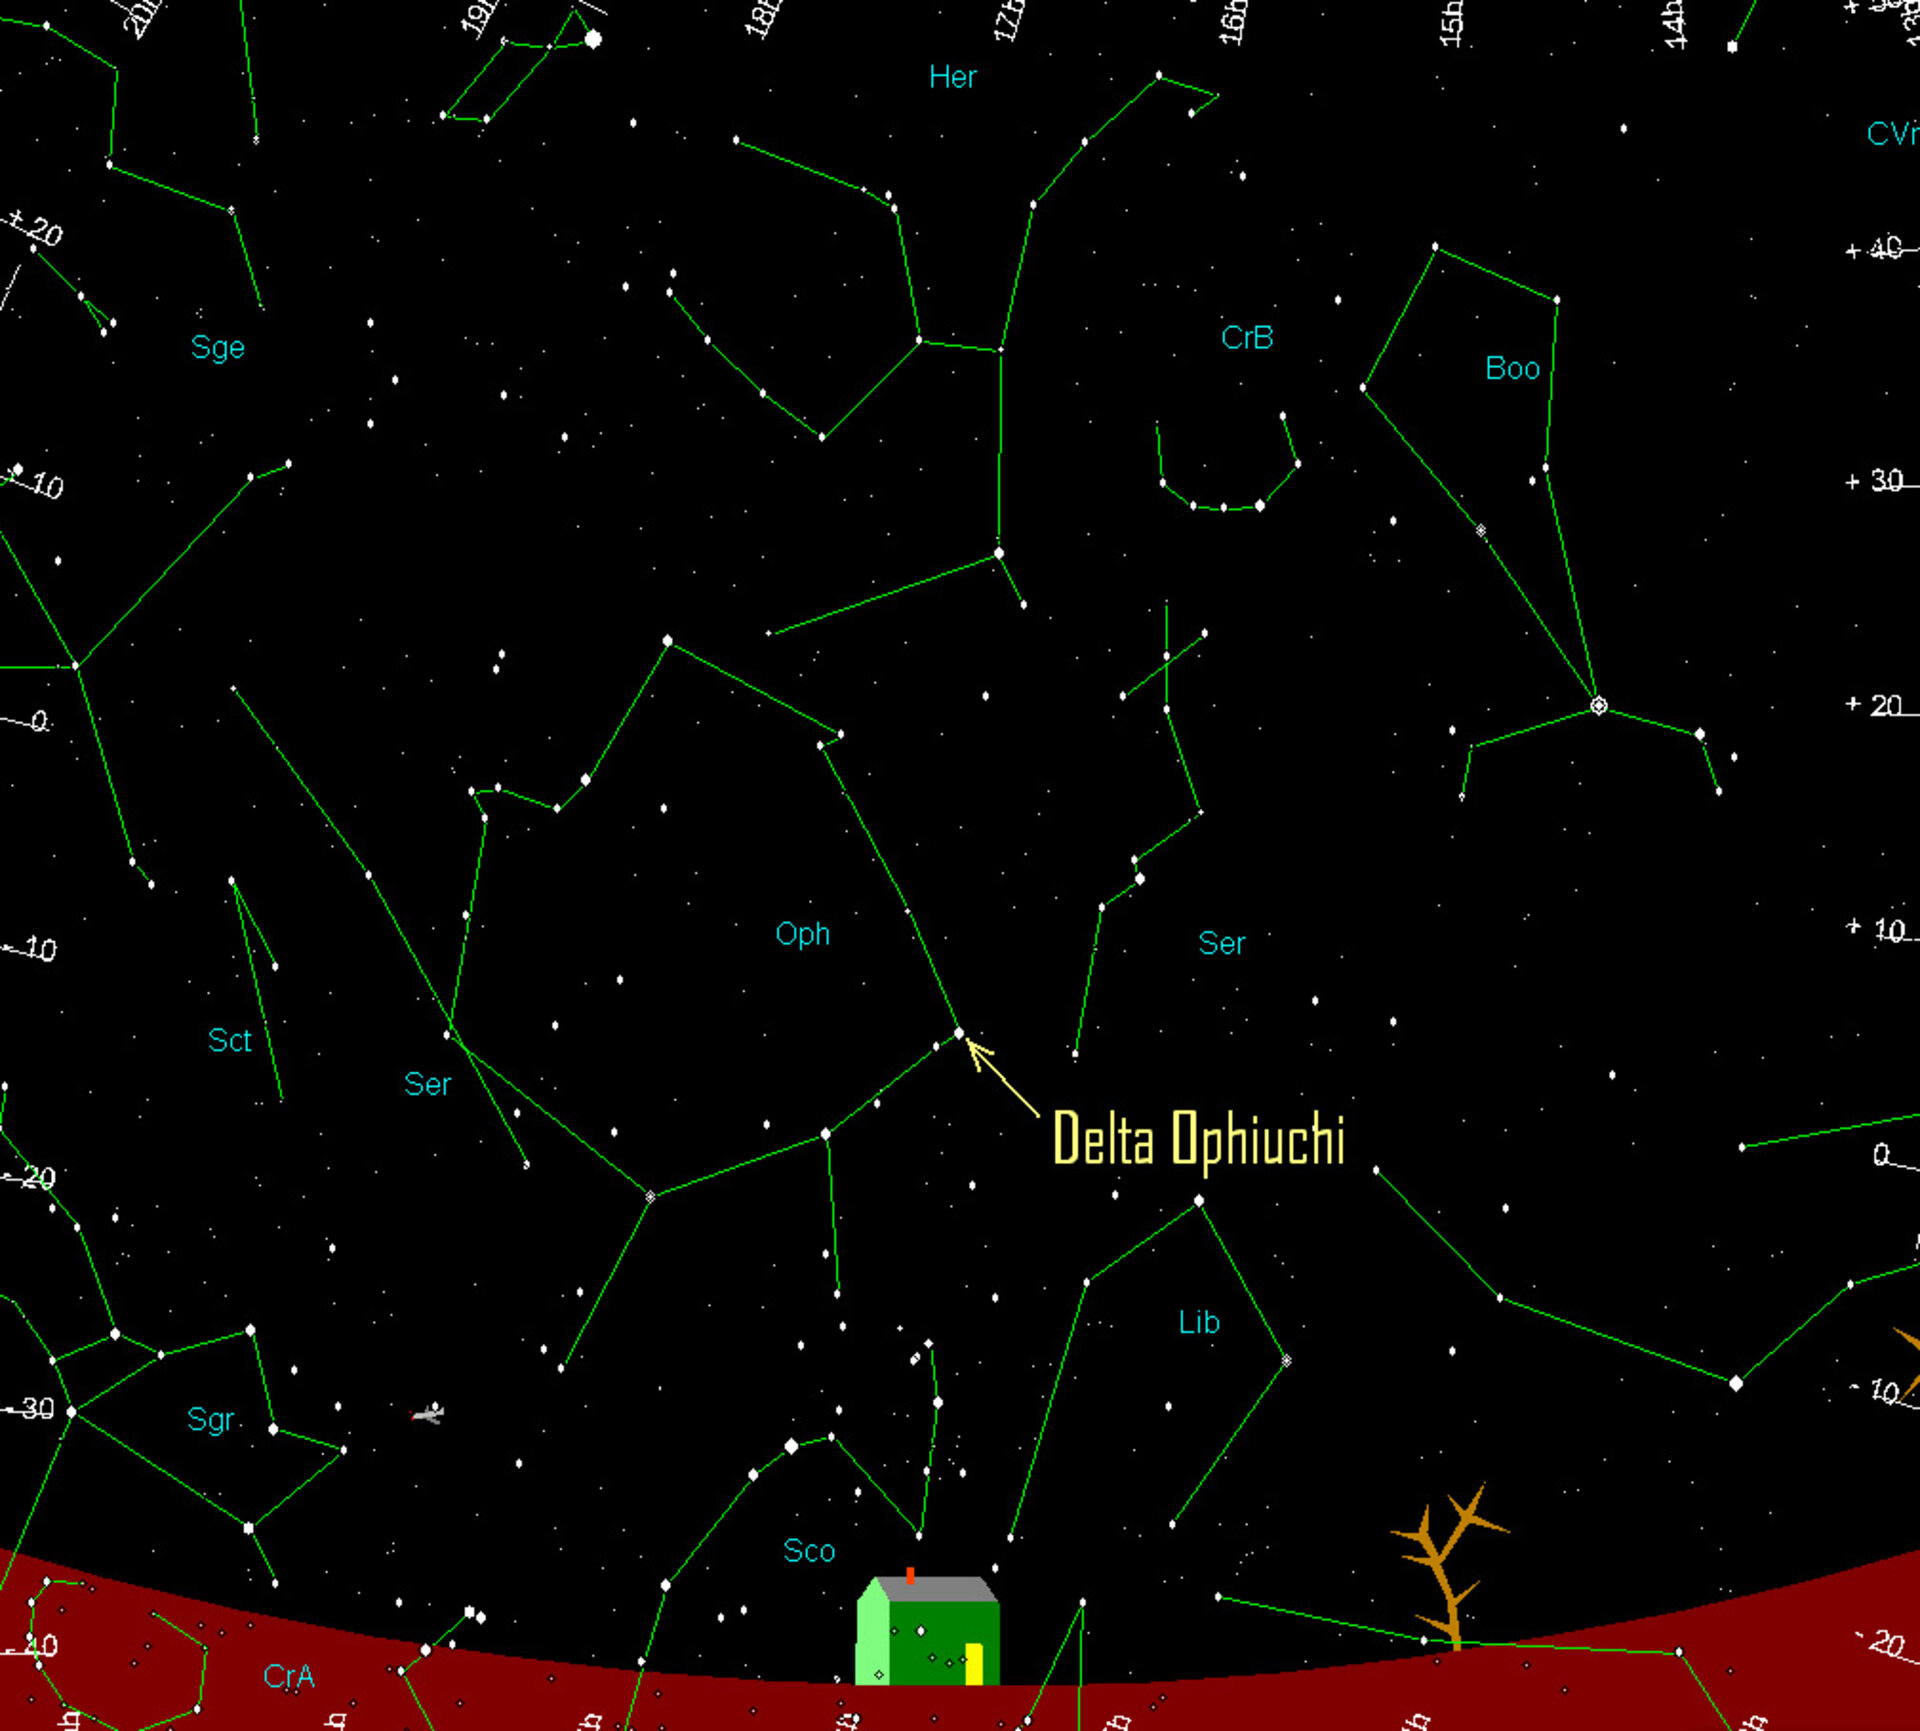 Star chart showing the sky from central Europe